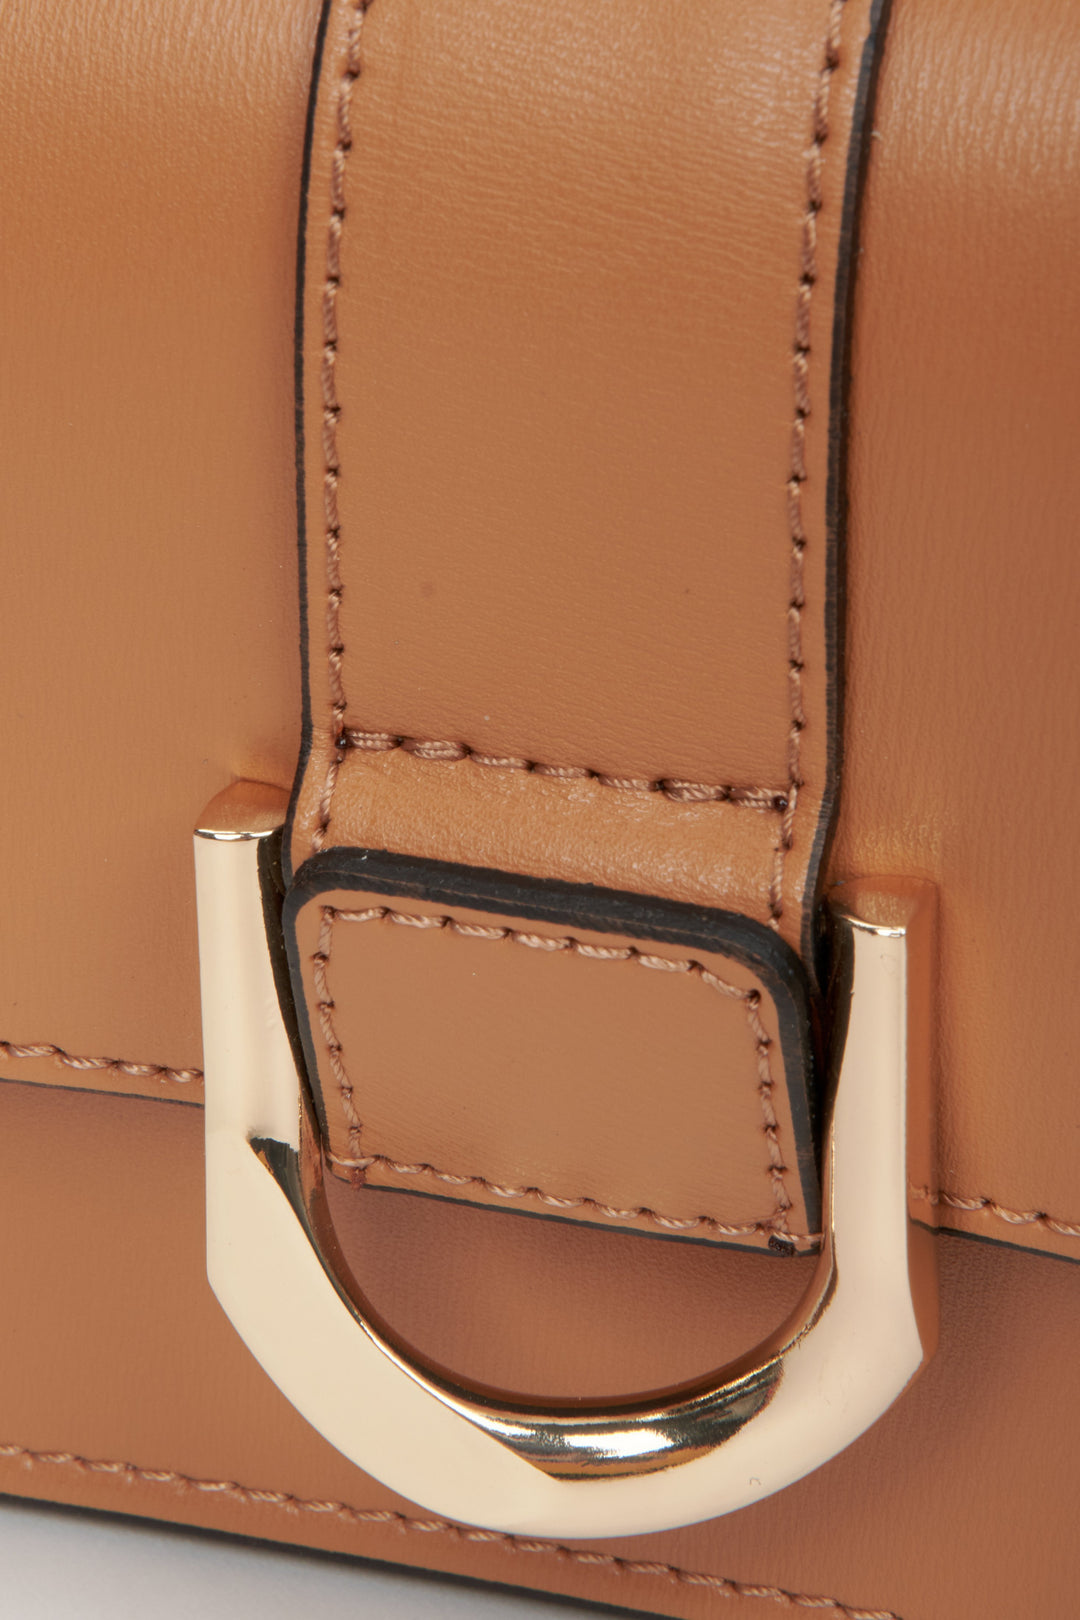 Brown leather women's handbag - a close-up on details.